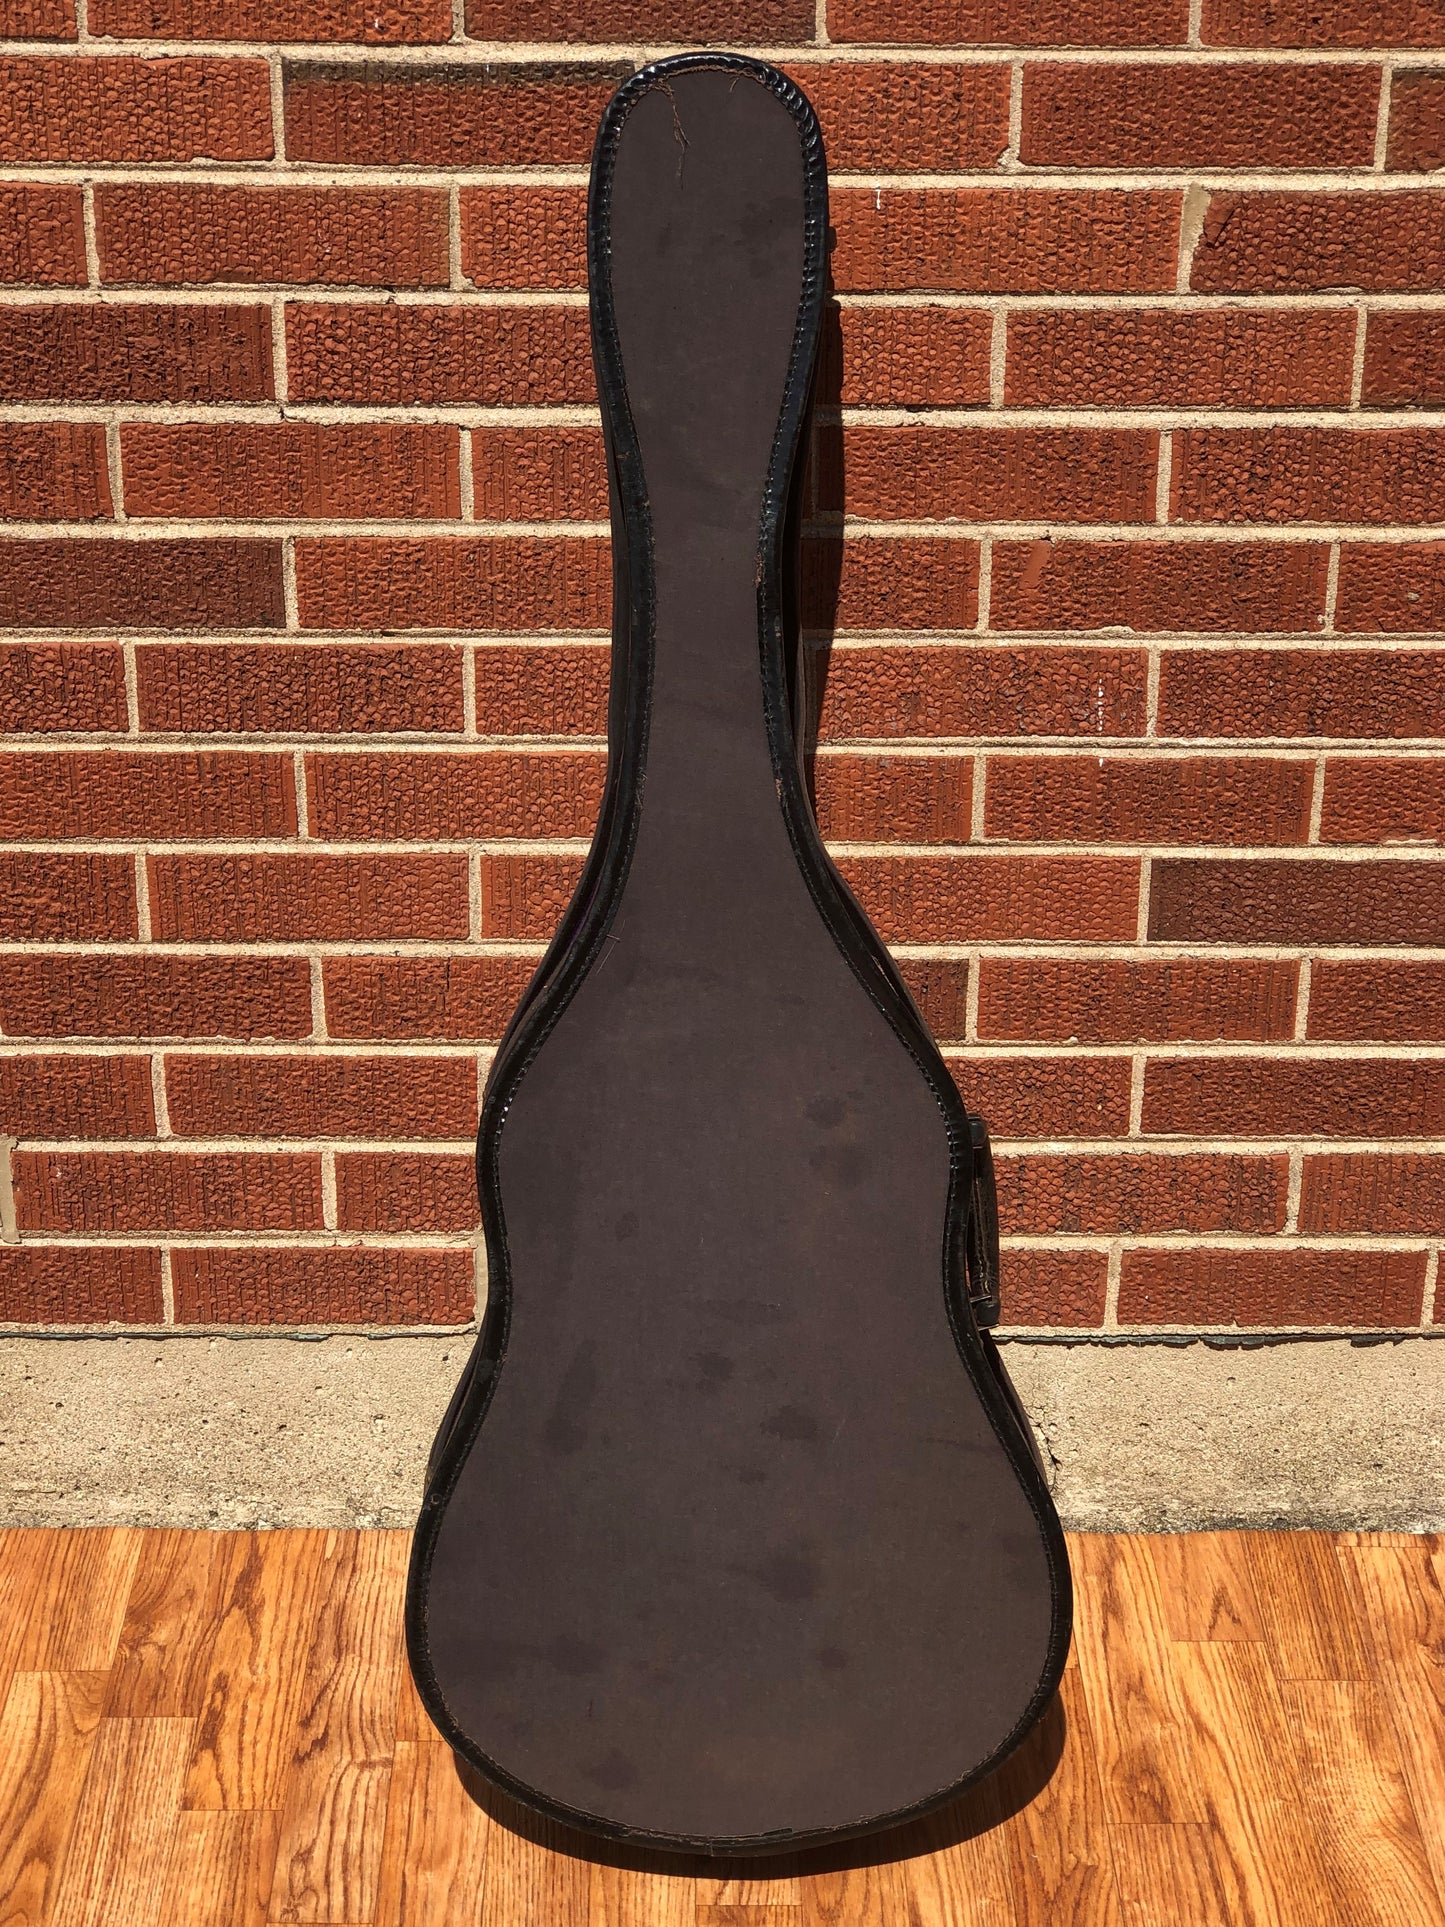 Vintage 1930s Geib Purple Liner Parlor Acoustic Guitar Case Grey for Gibson, Kay, Others